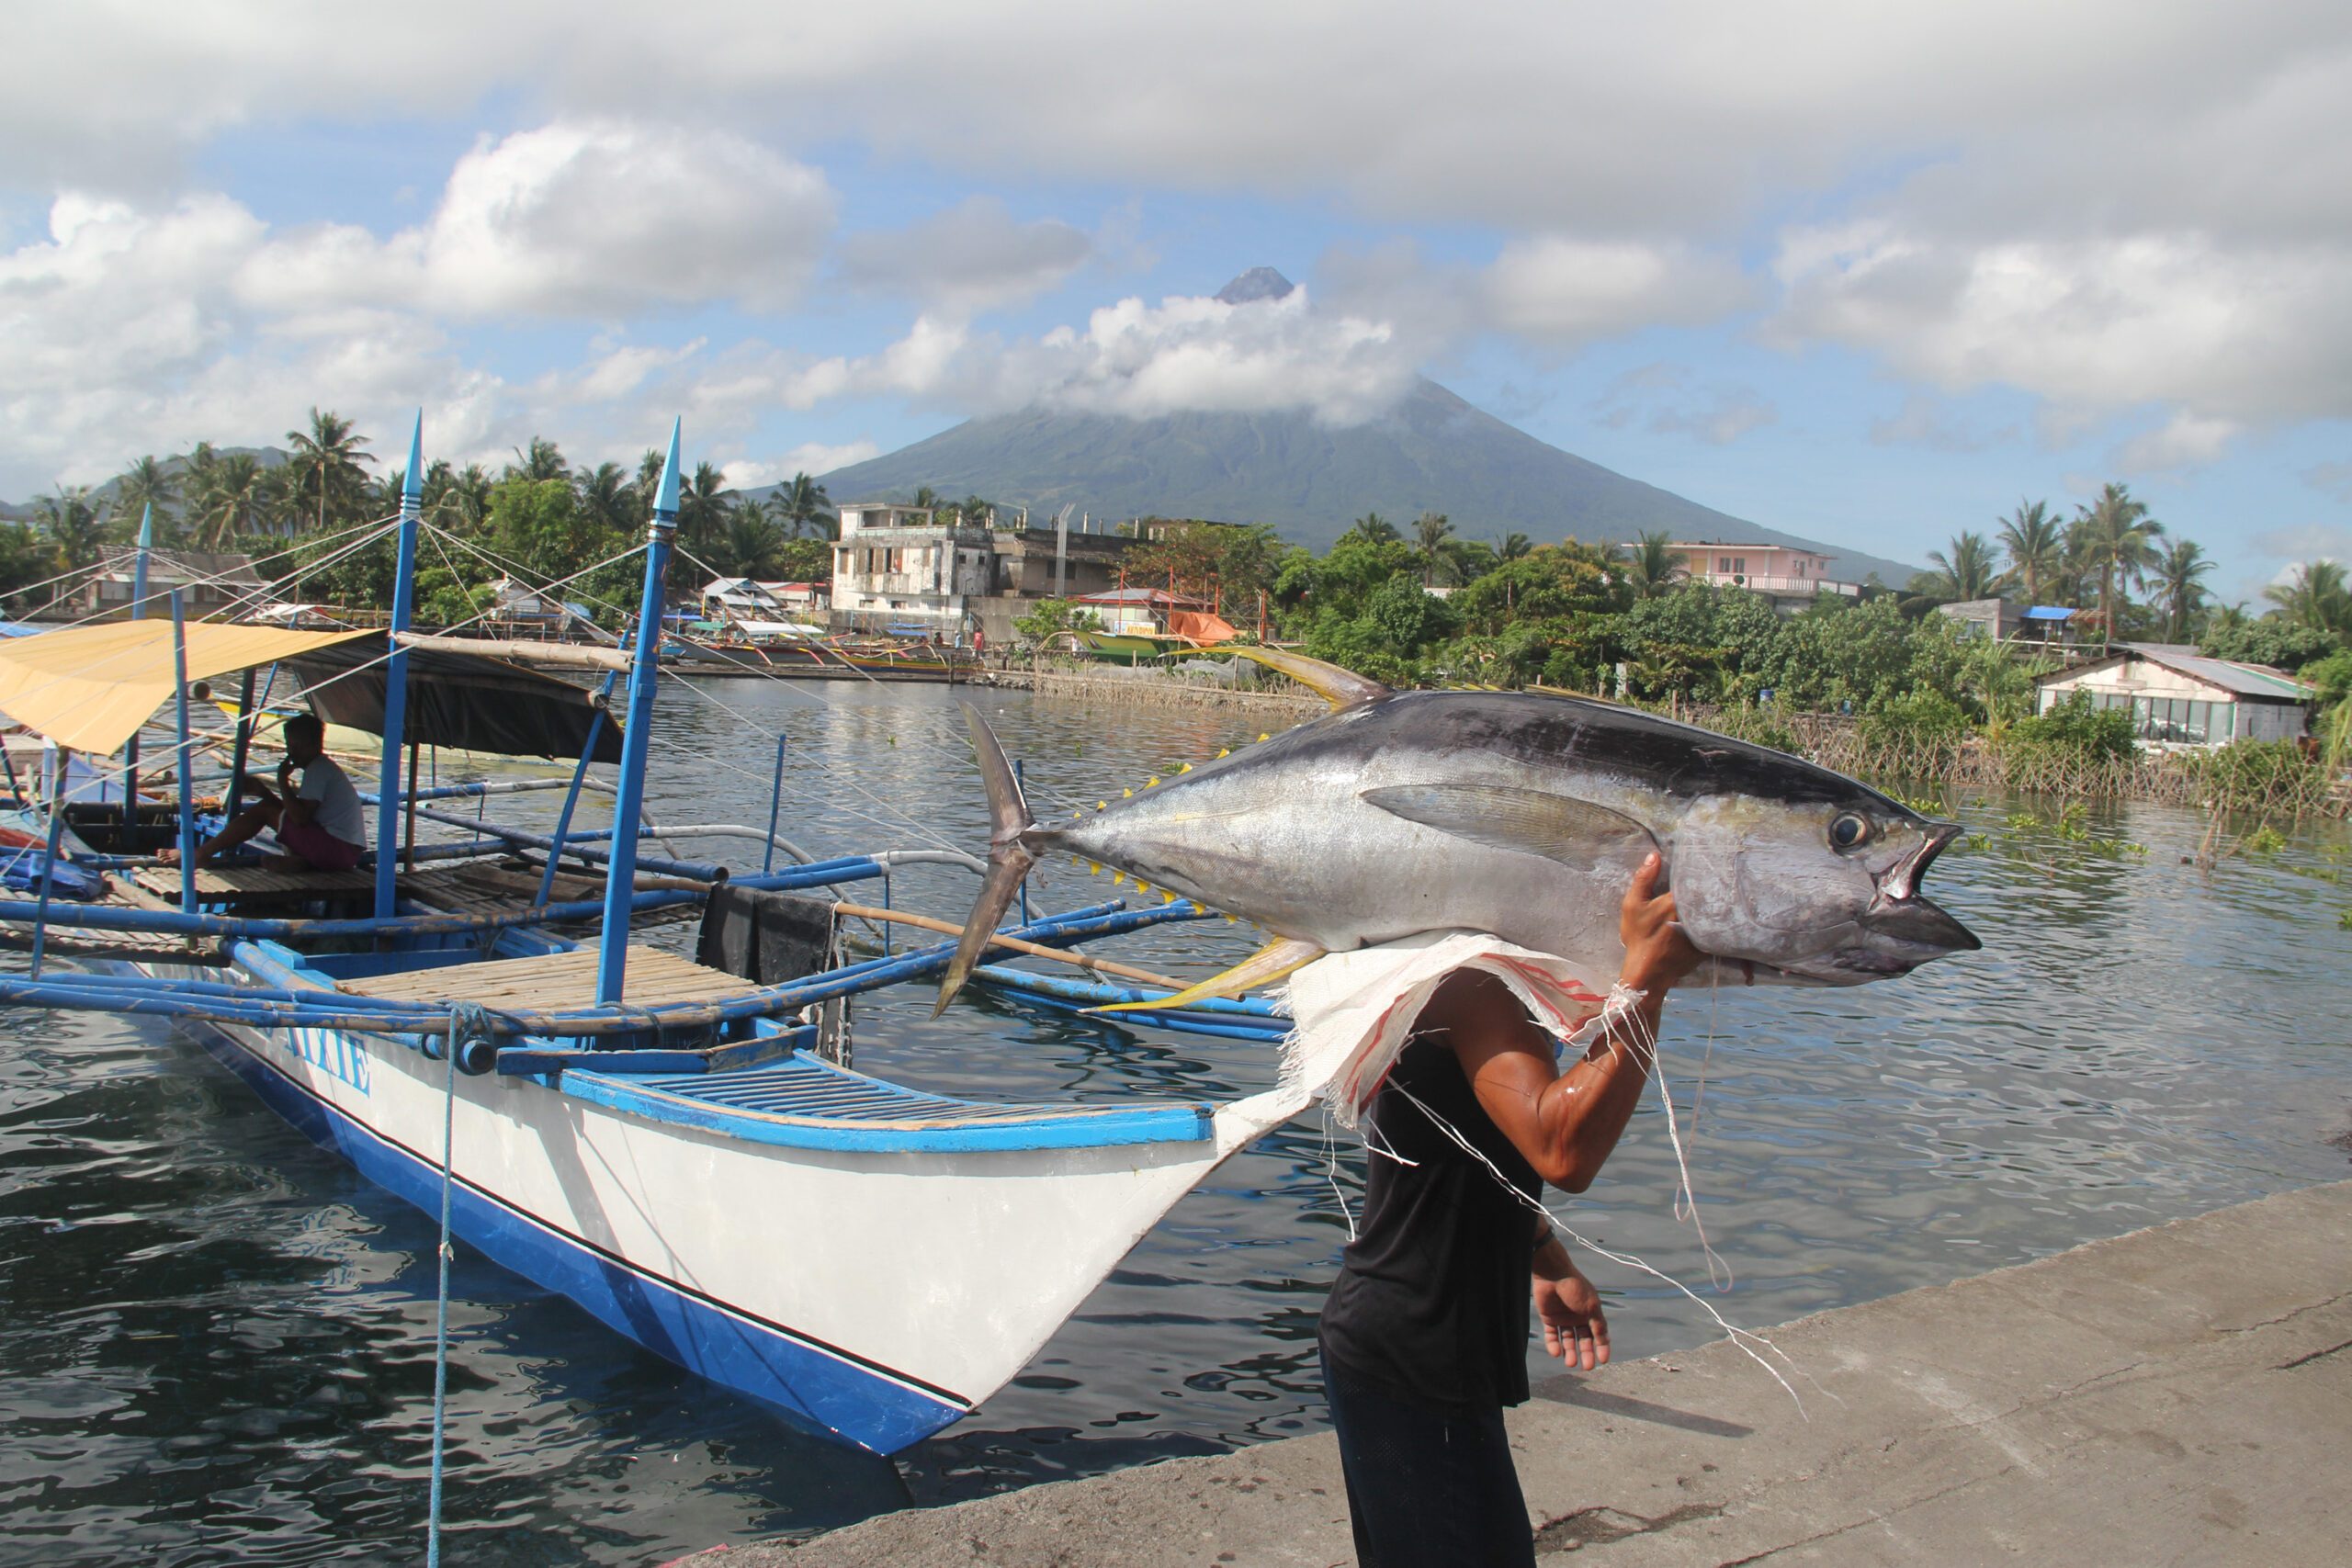 Tuna fishers in Albay revive old practices to save seas